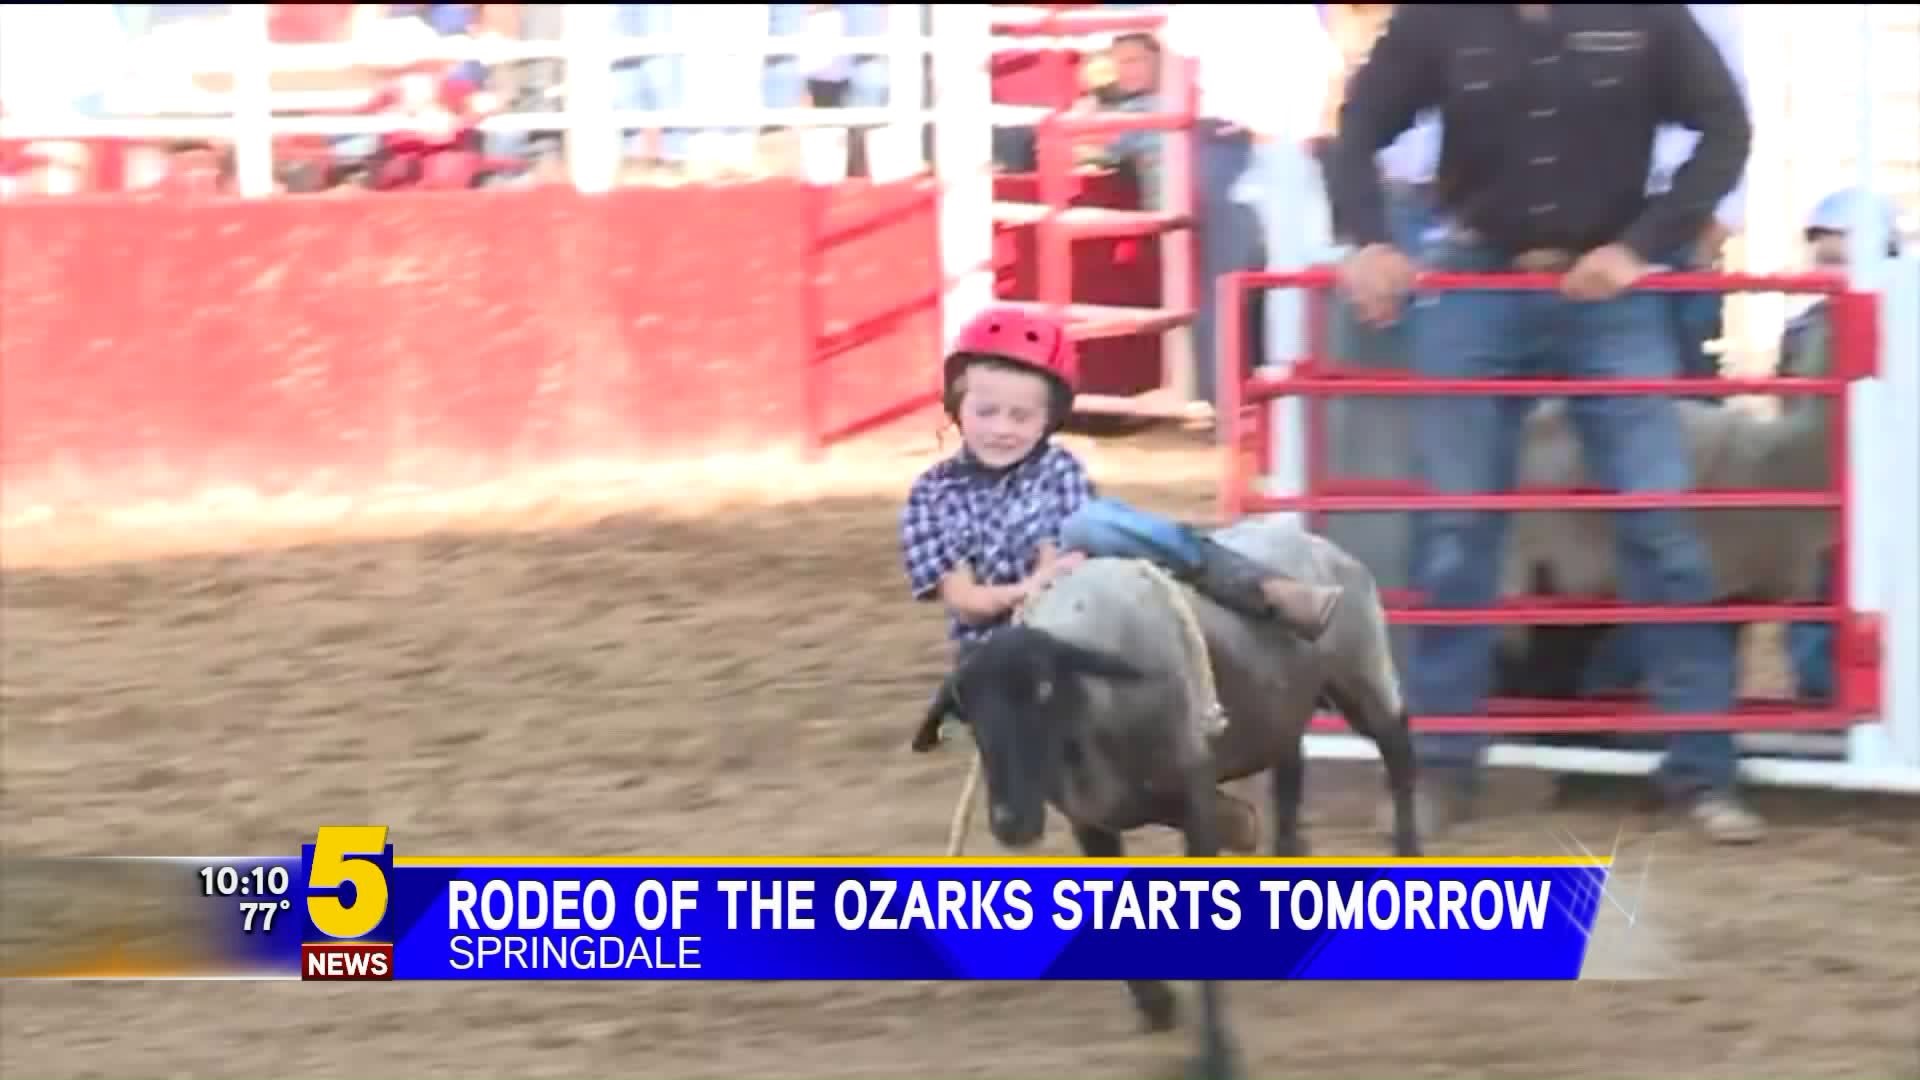 Rodeo of the Ozarks Starts Tomorrow